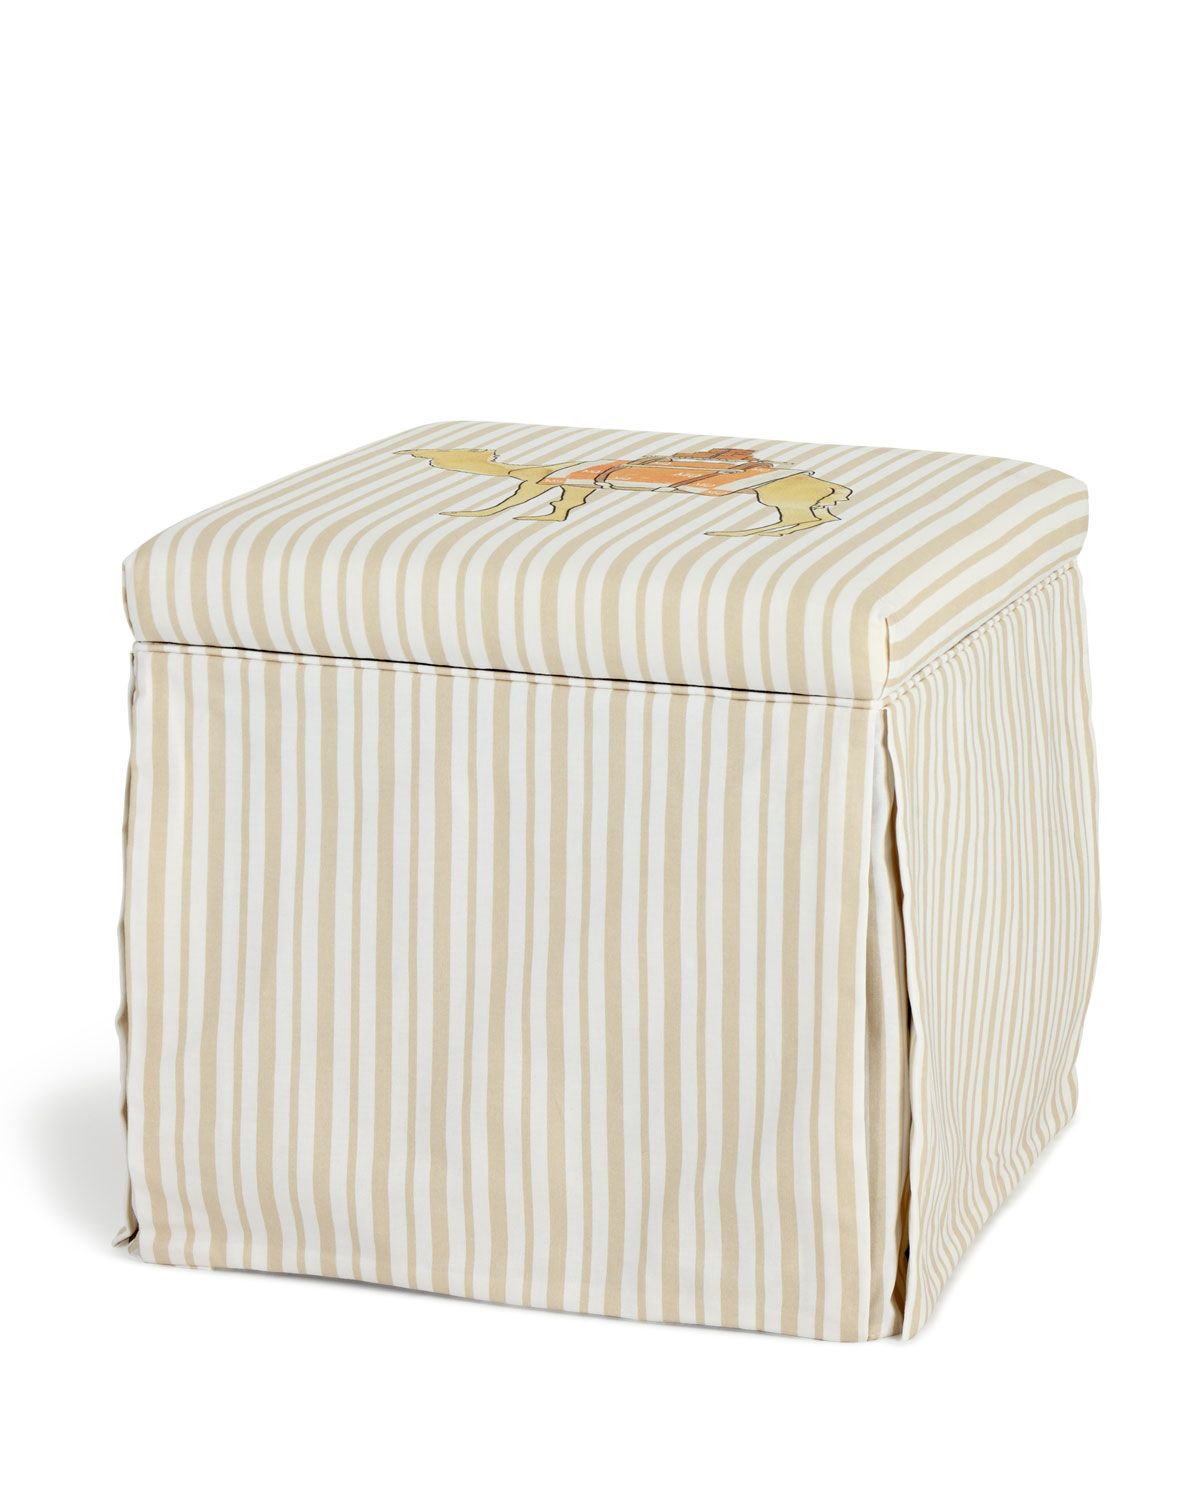 Gray Stripes Cylinder Pouf Ottomans Throughout Preferred Cloth & Company X Gray Malin Camel Stripe Skirted Storage Ottoman (View 1 of 10)